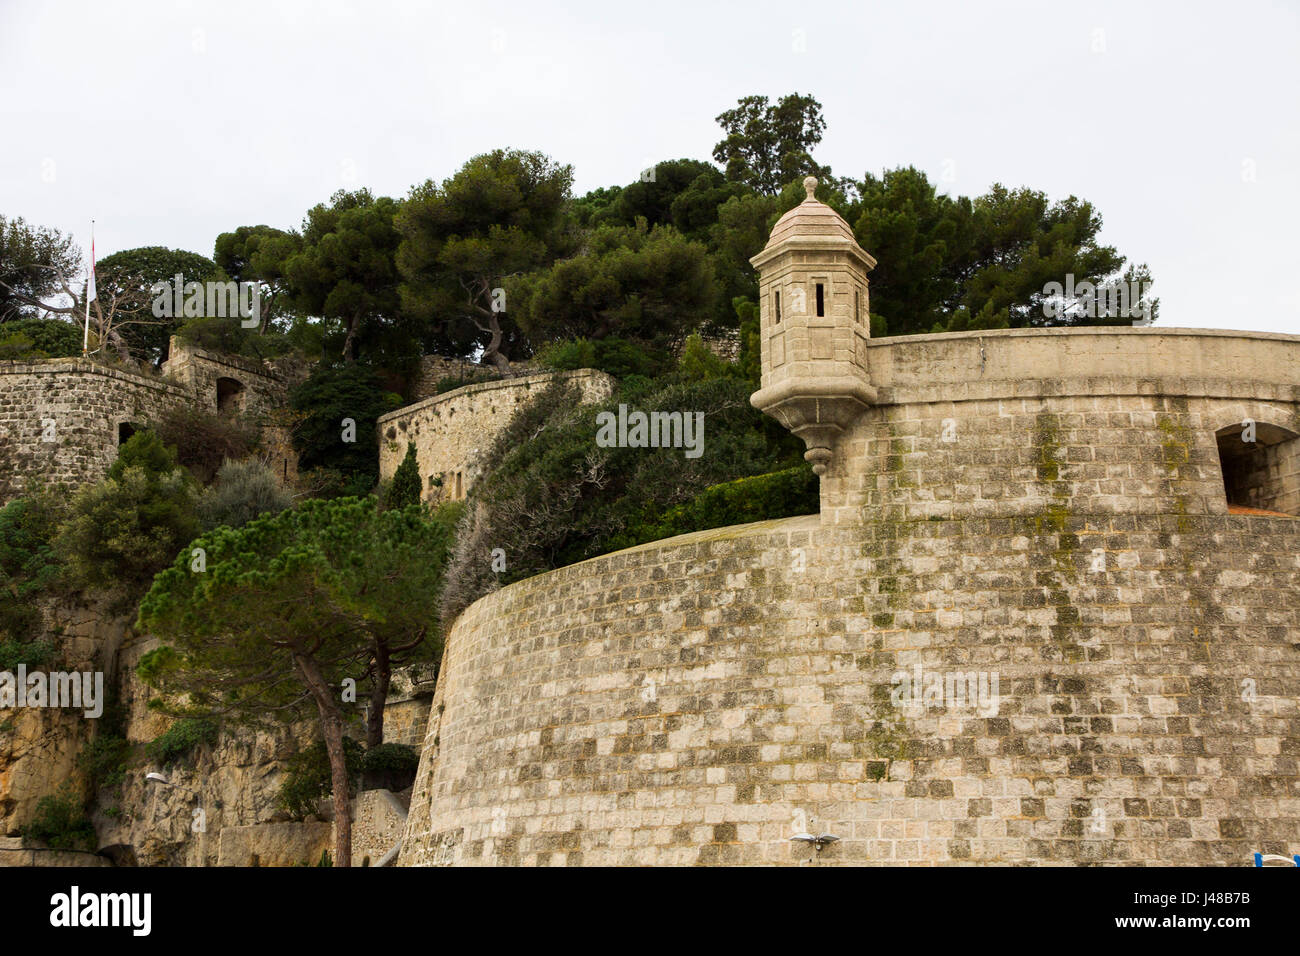 Fort Antoine is an 18th century fortress that now serves as an open-air theatre in Monte Carlo, Monaco. Stock Photo